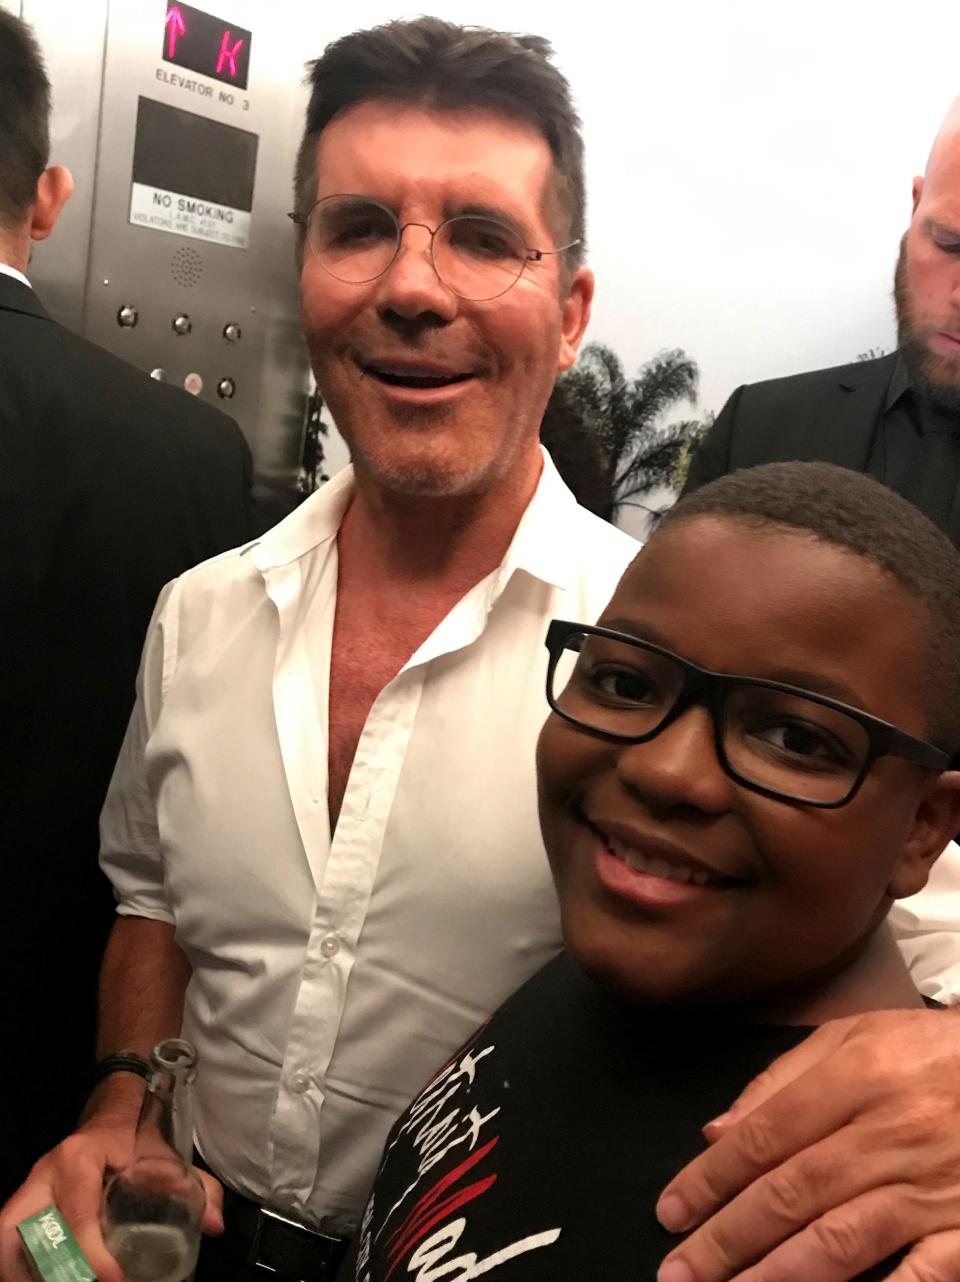 Kodie Chandler bumped into "America's Got Talent" producer and judge Simon Cowell in an elevator when he was in California competing on the show with the Detroit Youth Choir in 2019. His parents, Denise and Richard Chandler, snapped a photo.